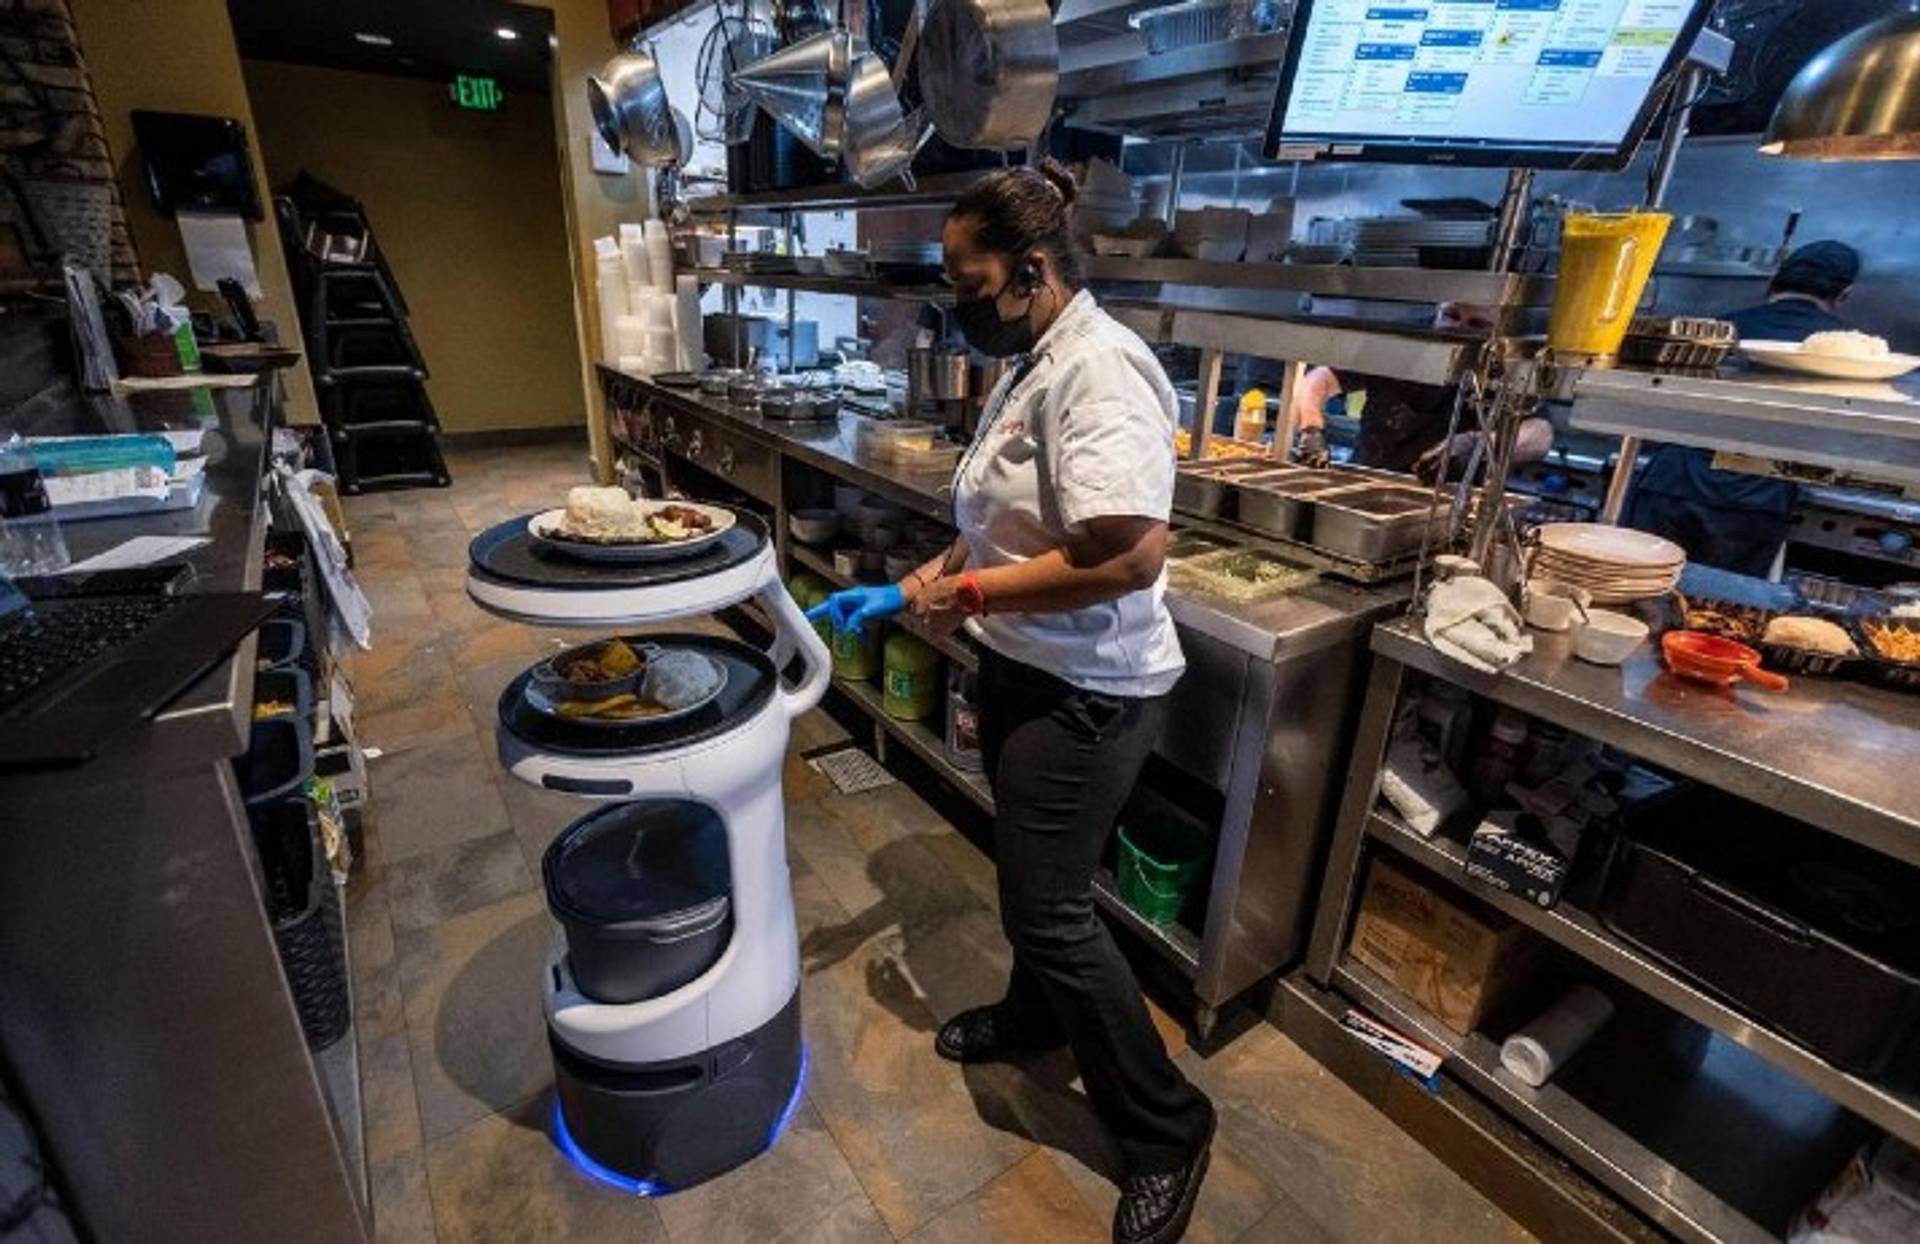 Restaurants turn to robots to cope with staff shortages